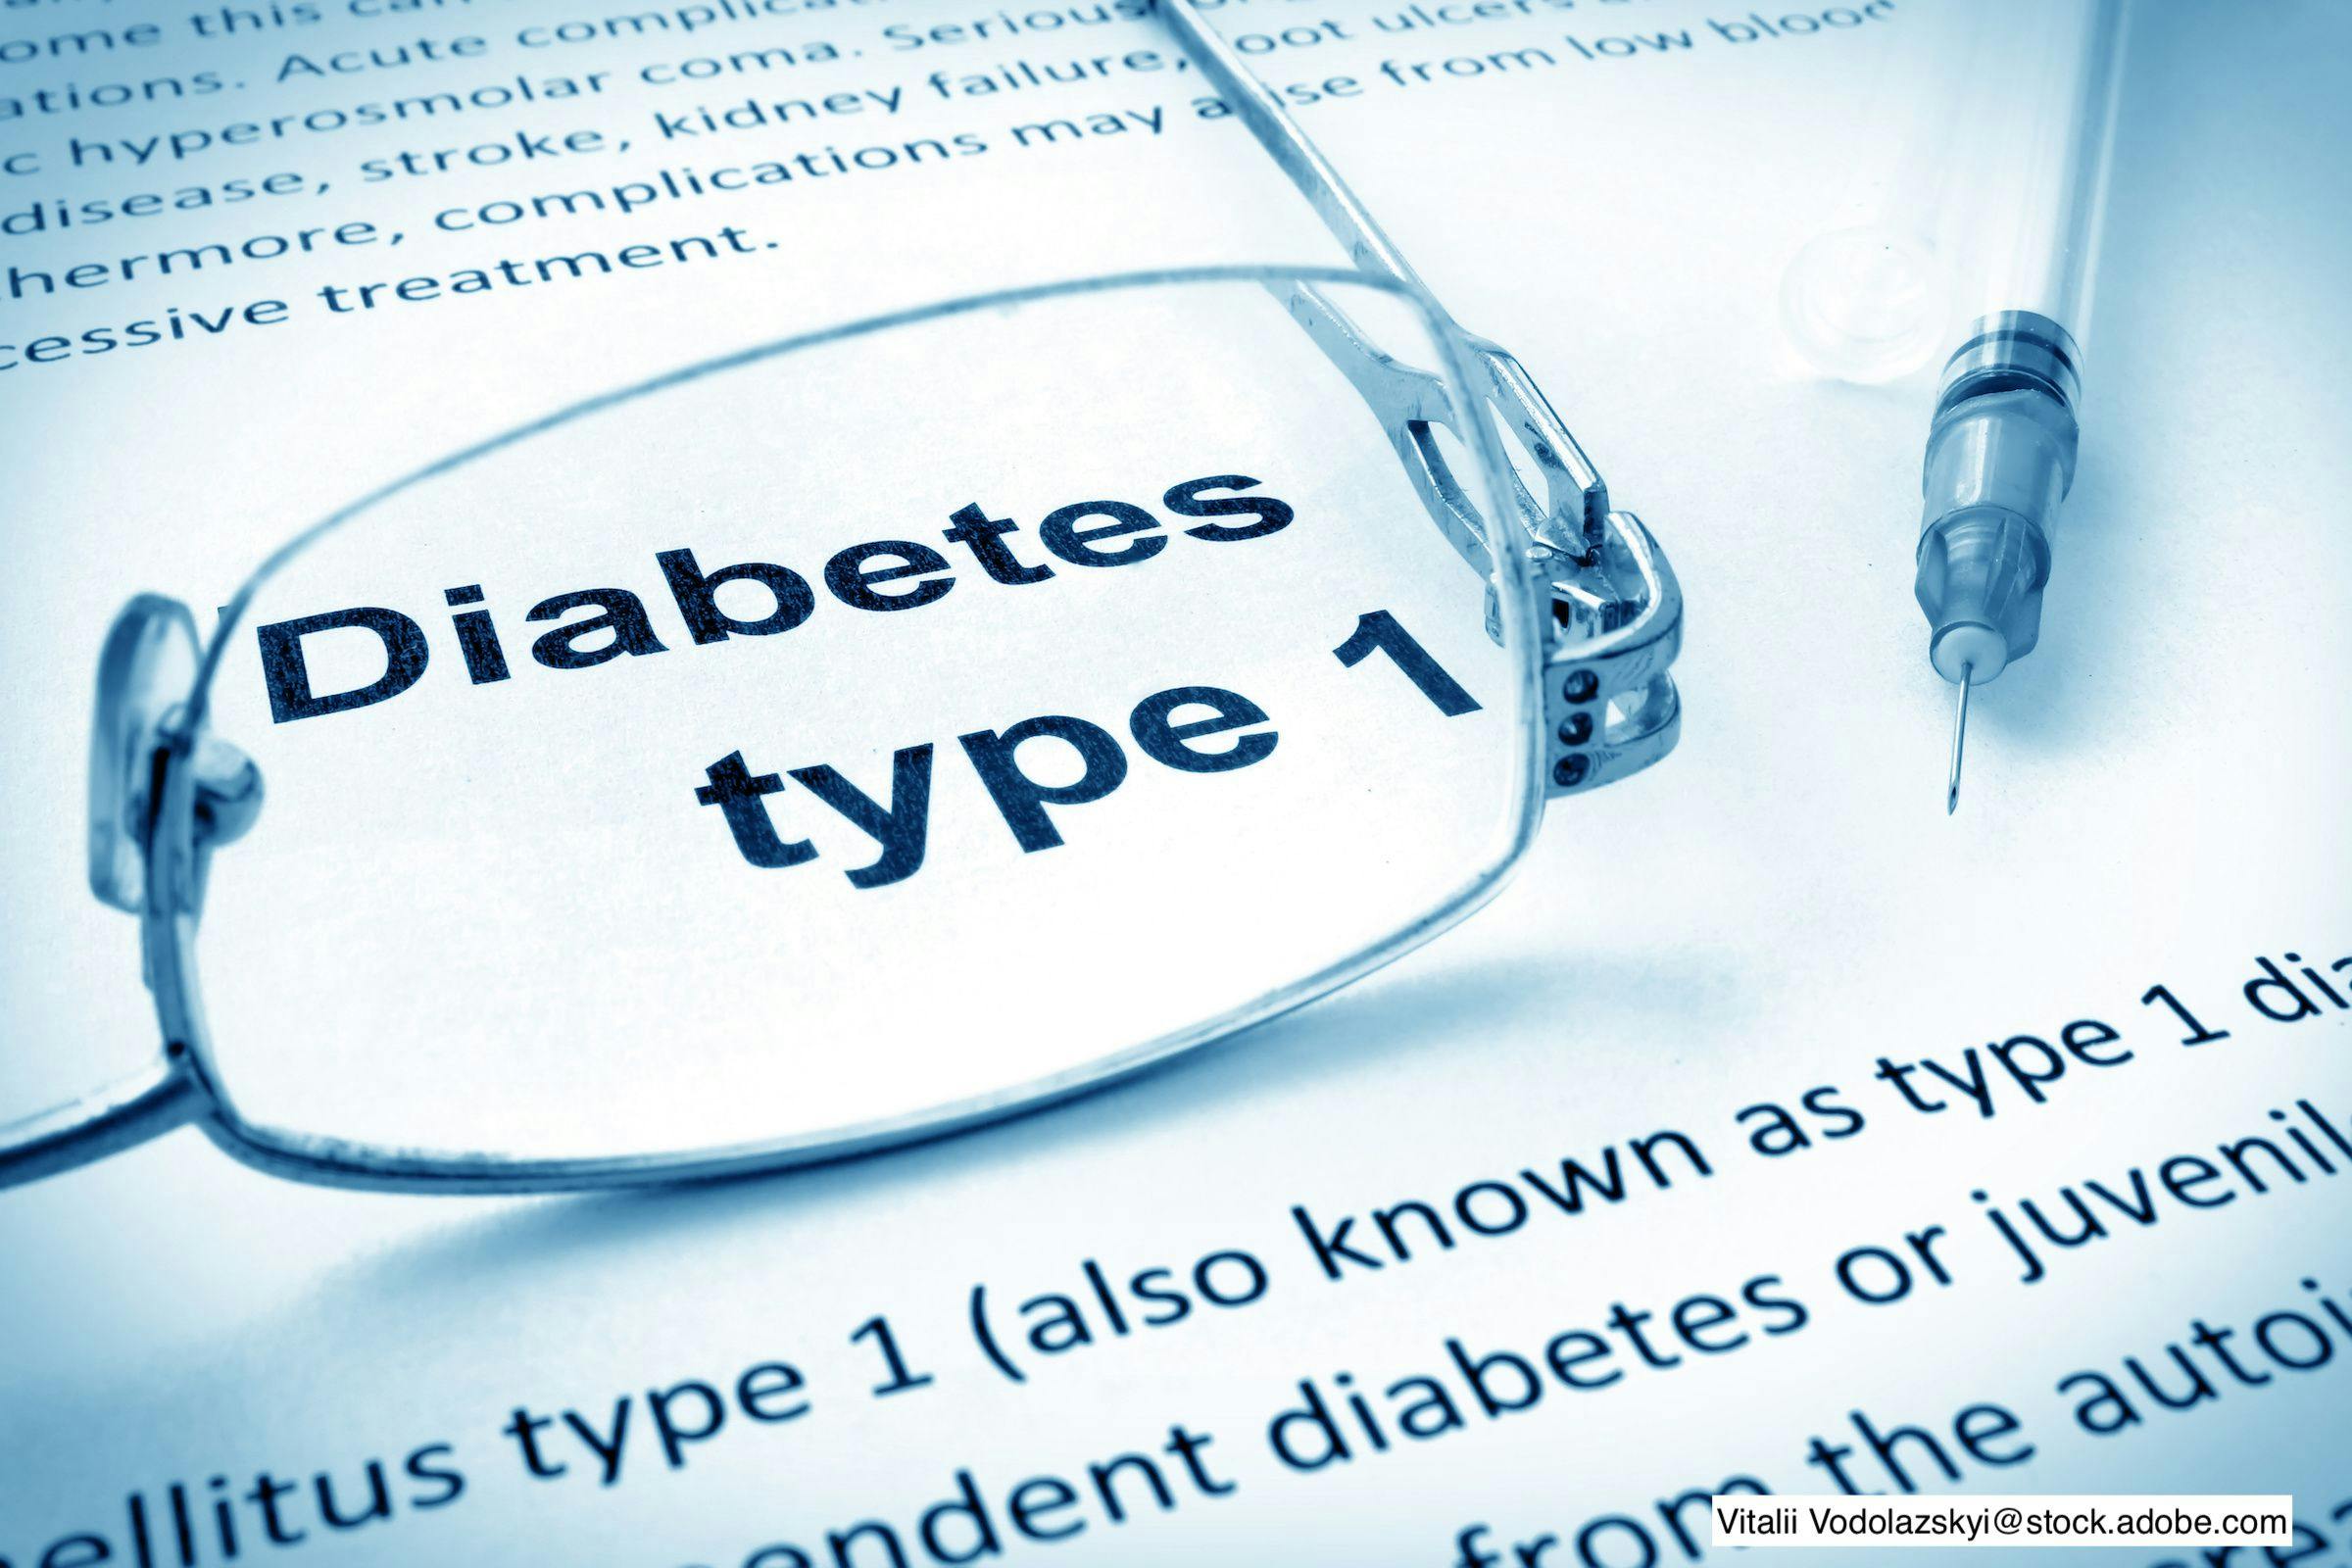 Extended-wear insulin infusion set leads to greater satisfaction in type 1 diabetes